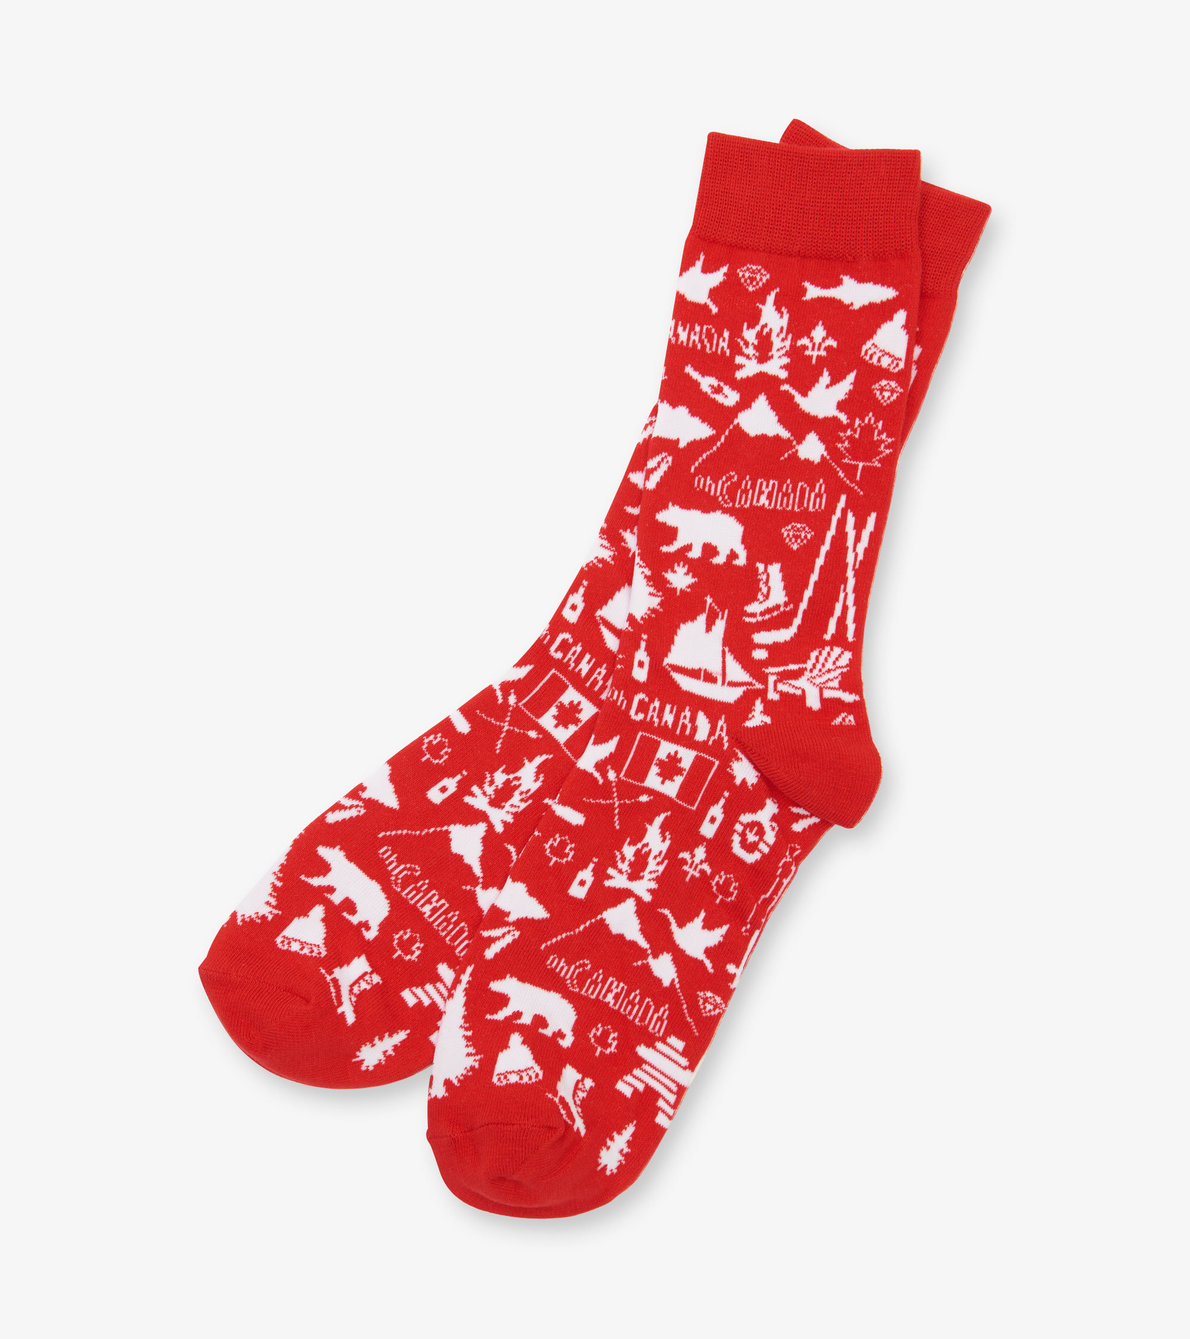 View larger image of Oh Canada Men’s Crew Socks